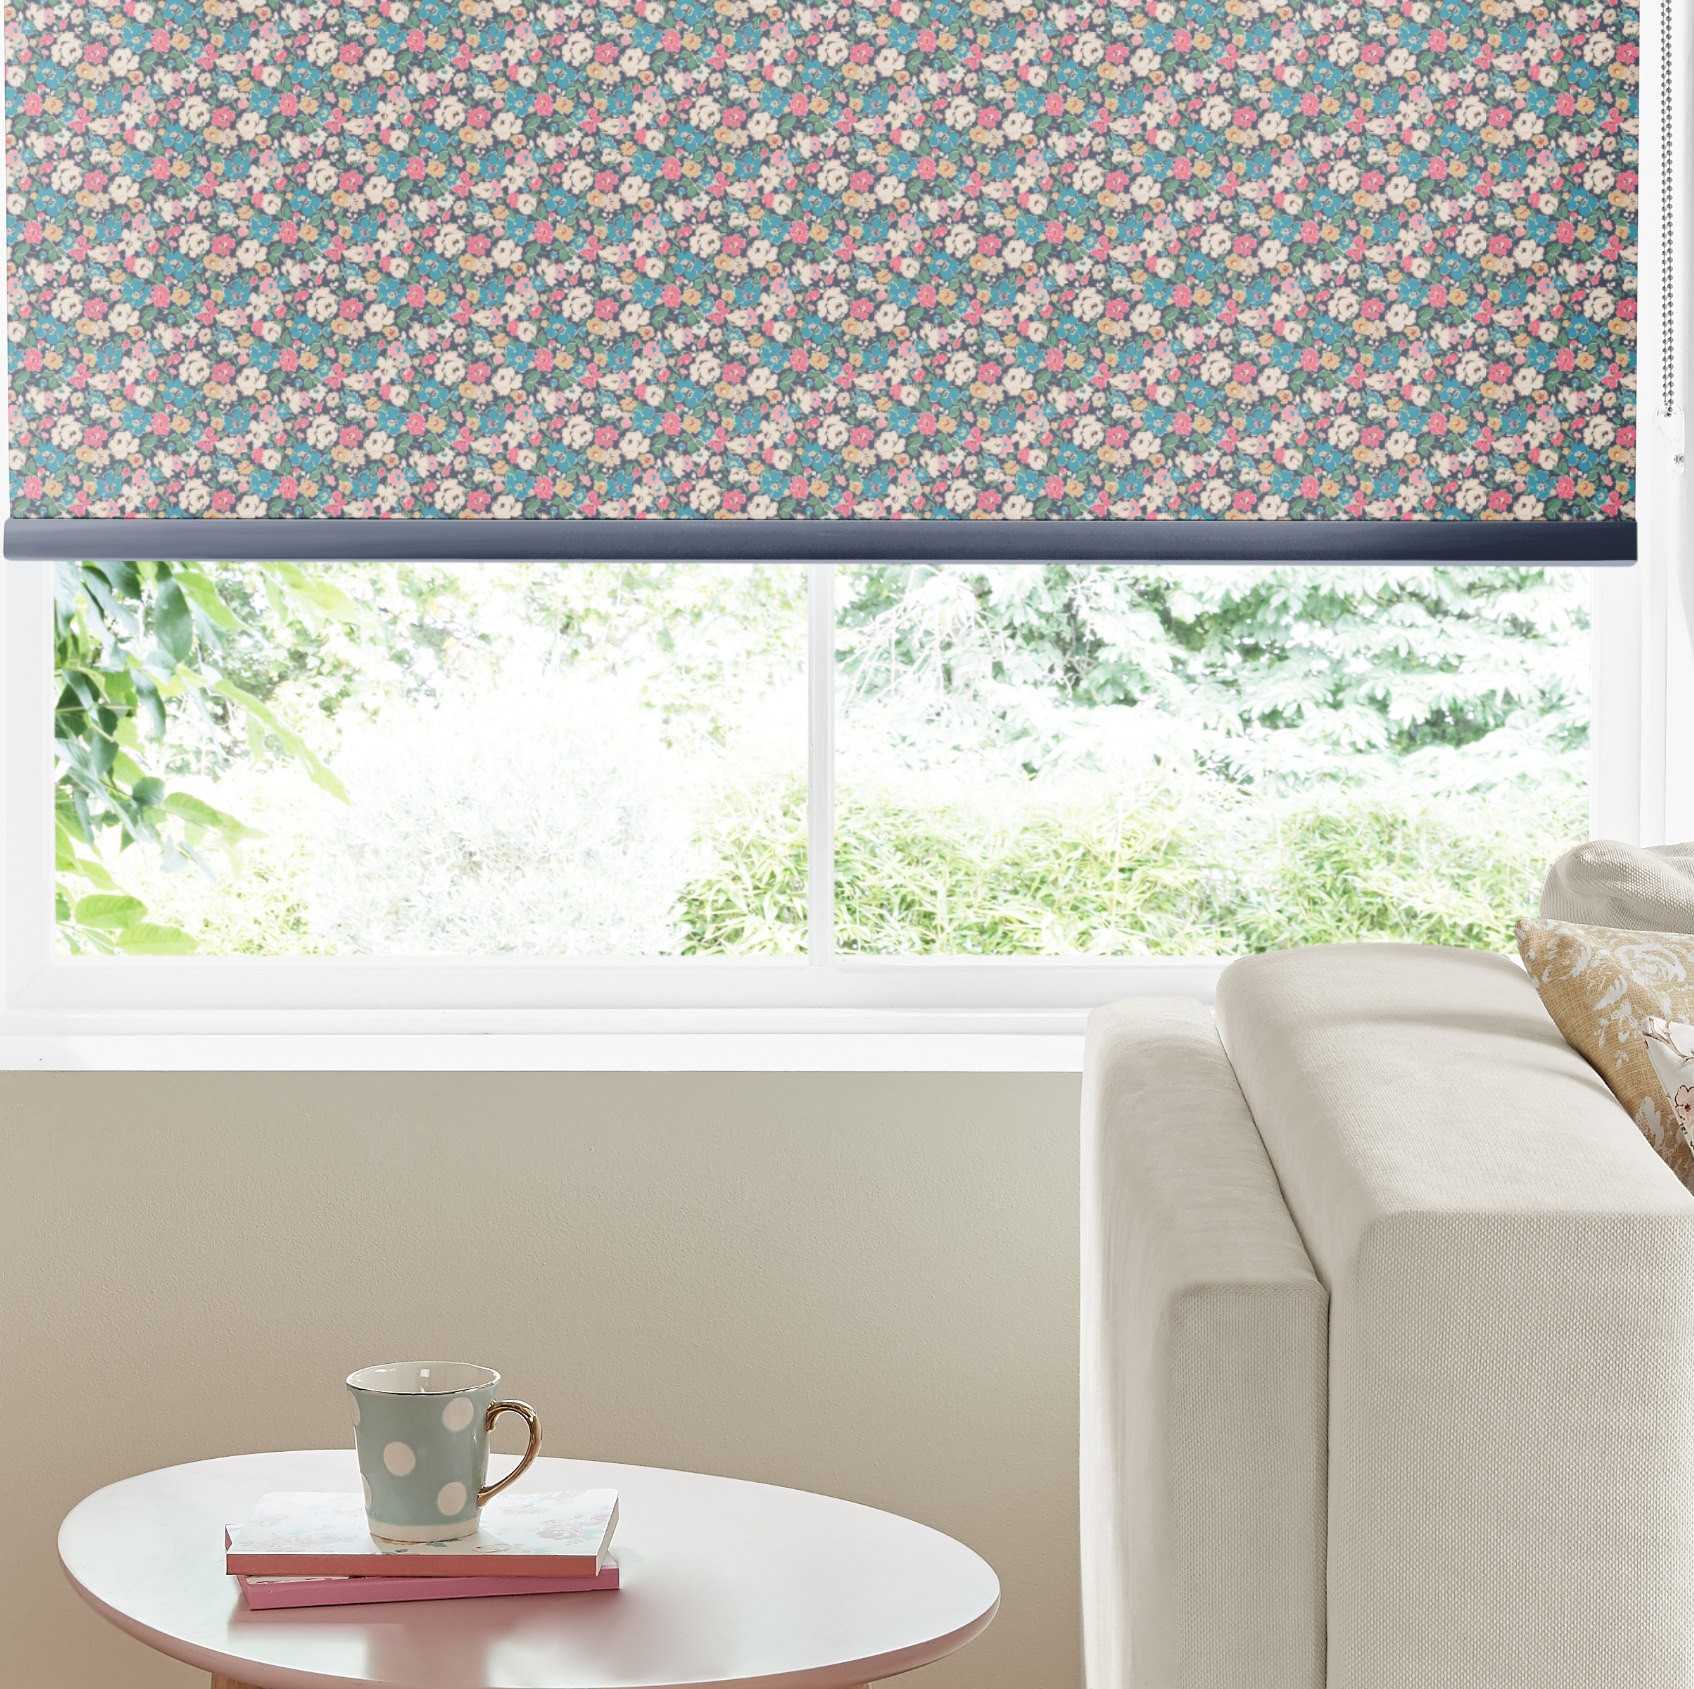 Cath Kidston Mews Ditsy Navy Dimout Roller Blind